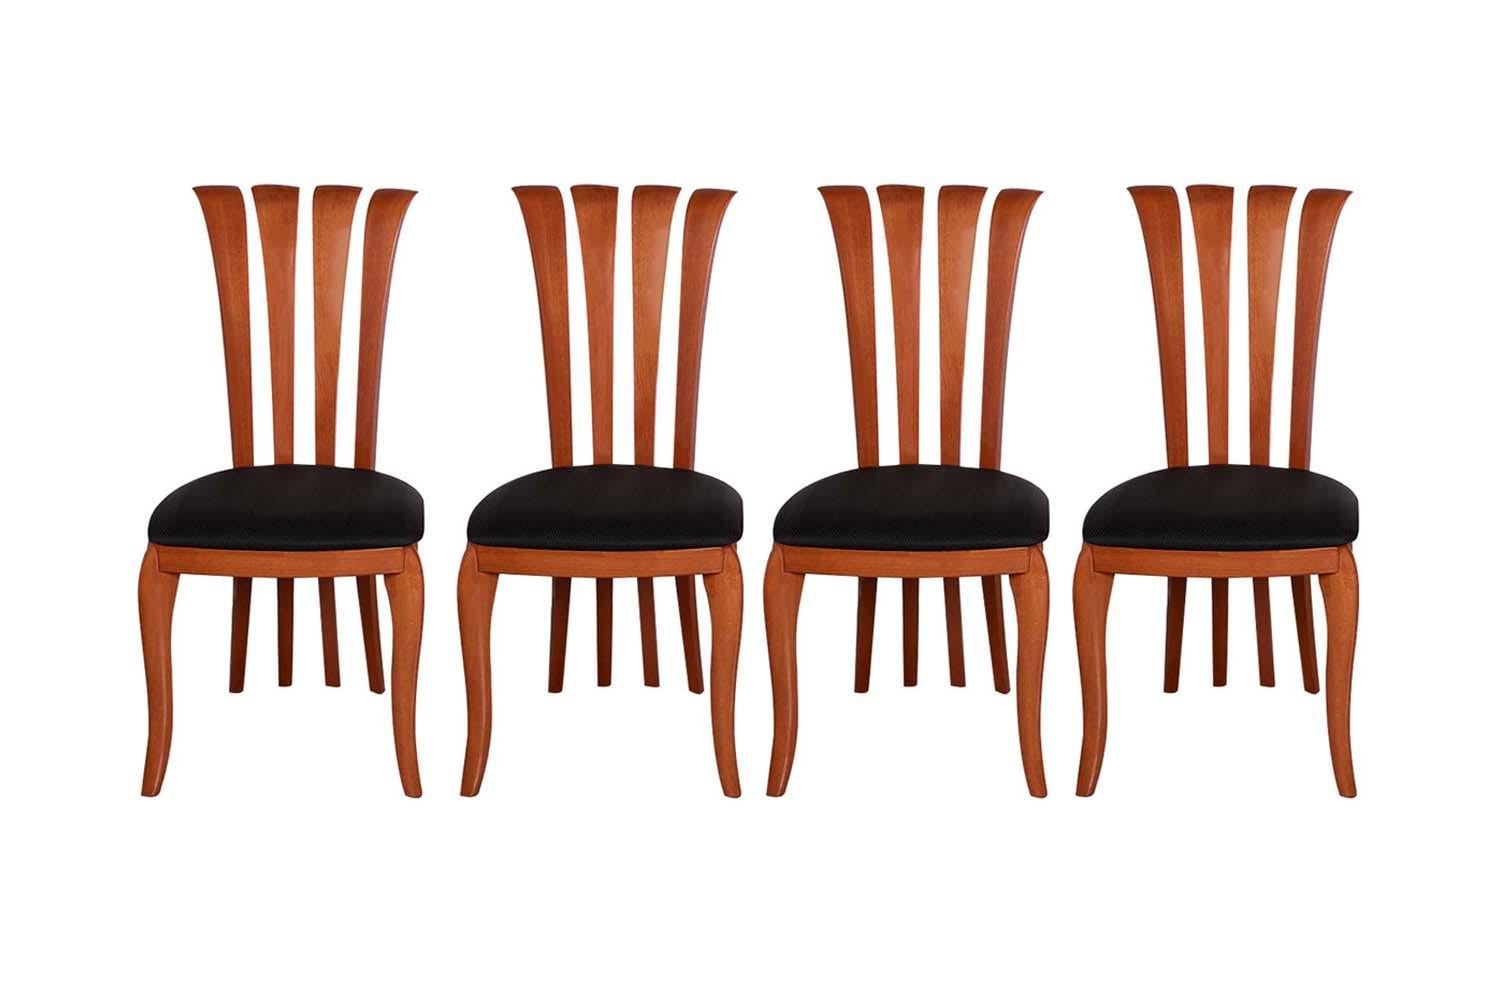 Spectacular set of four Italian curved -back dining side chairs by A. Sibau featuring sturdy, solid construction design. The four vertical ladder back curved slats continuing down to the floor, are elegant and pleasing to the eye, supported by